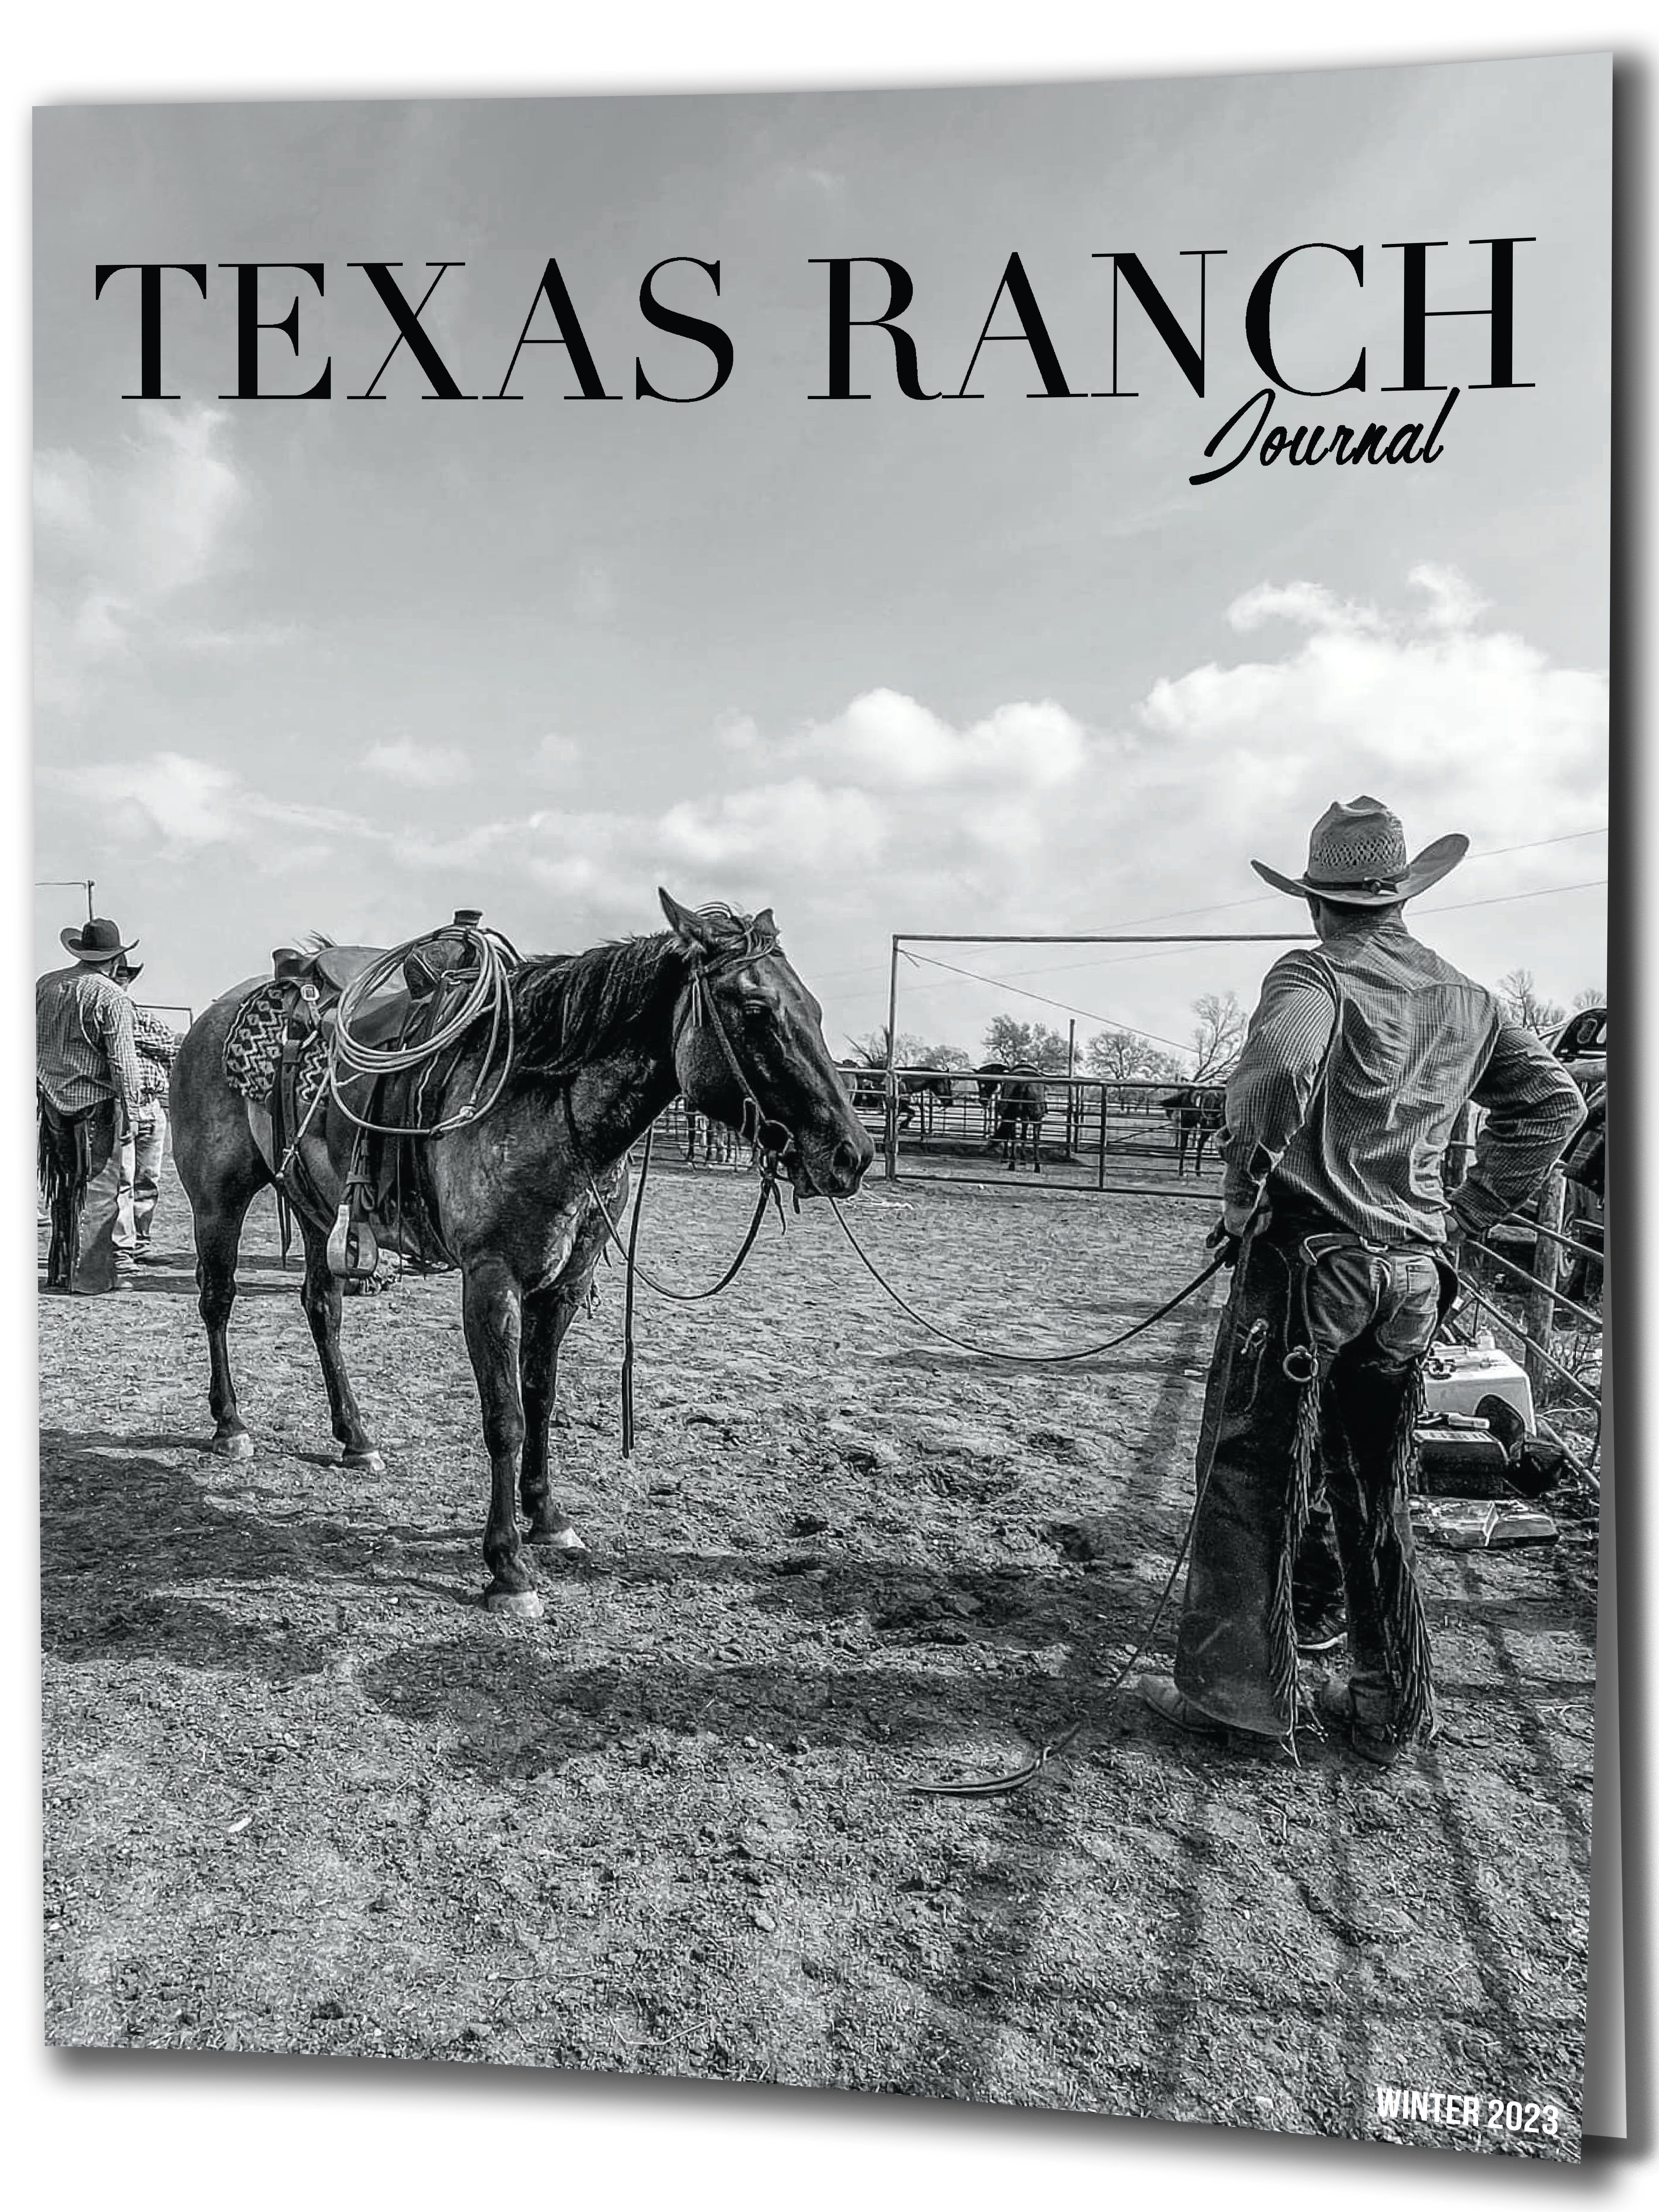 Texas Ranch Journal Spring 2022 Cover